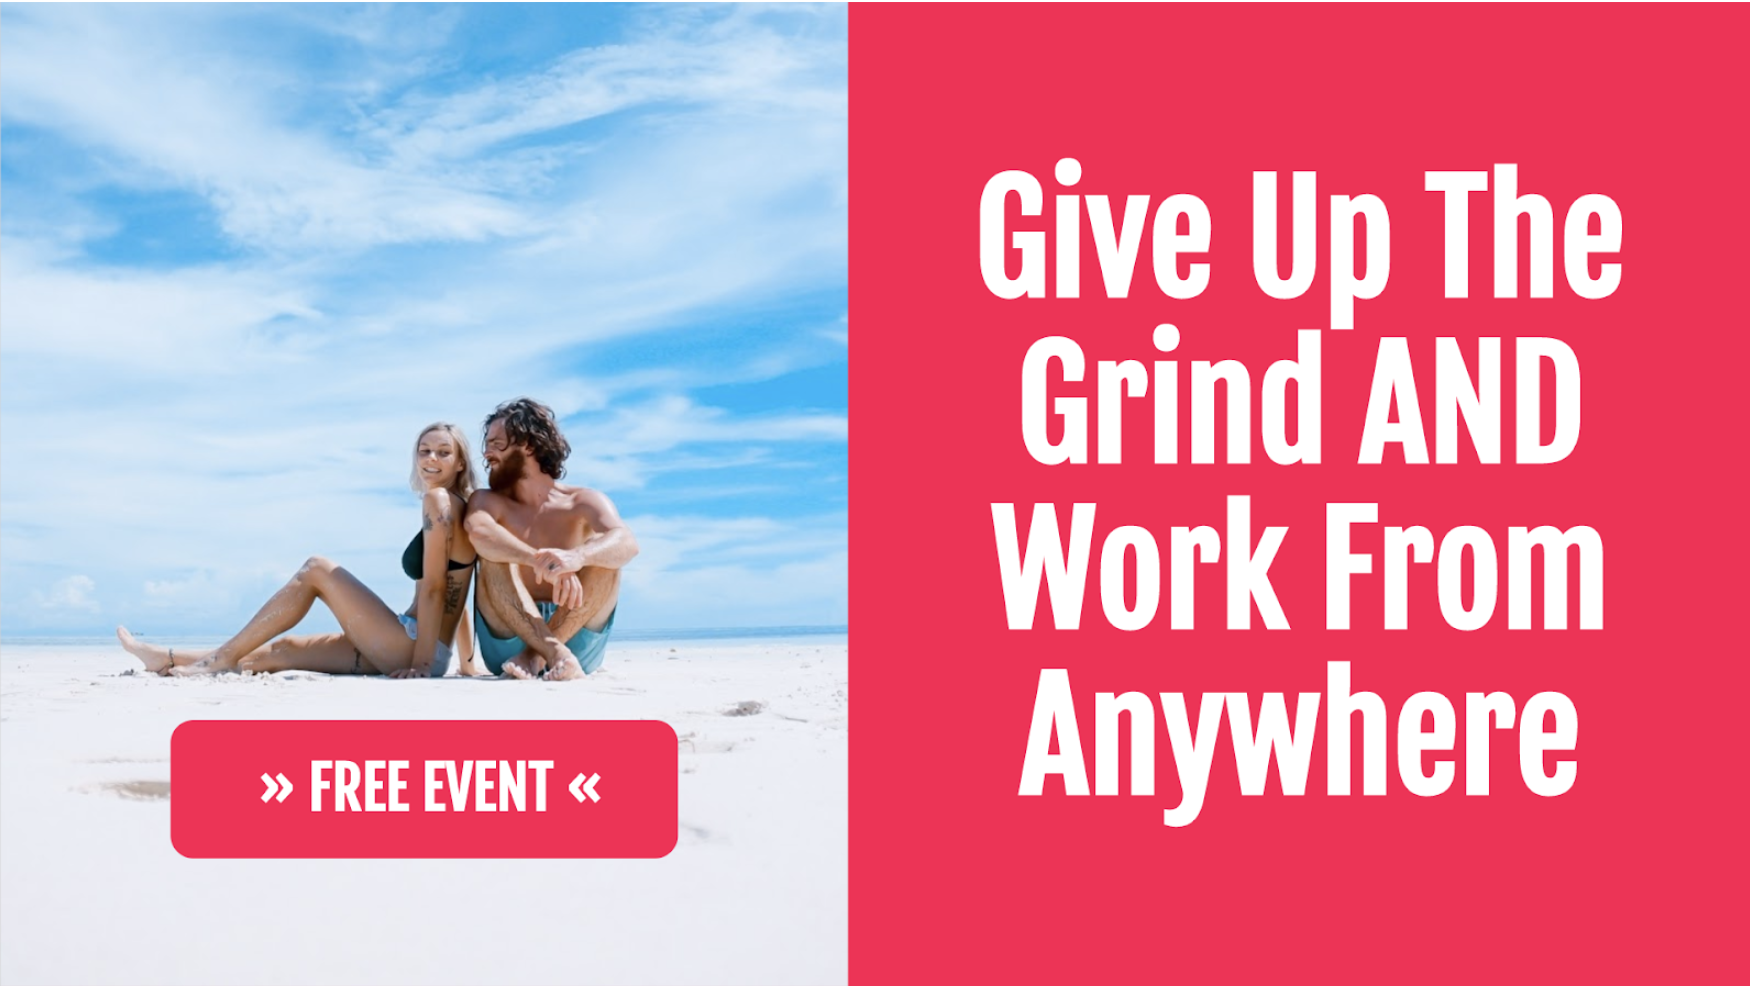 Avoid The Corporate Grind & Earn A 6 Figure Income Working From Anywhere